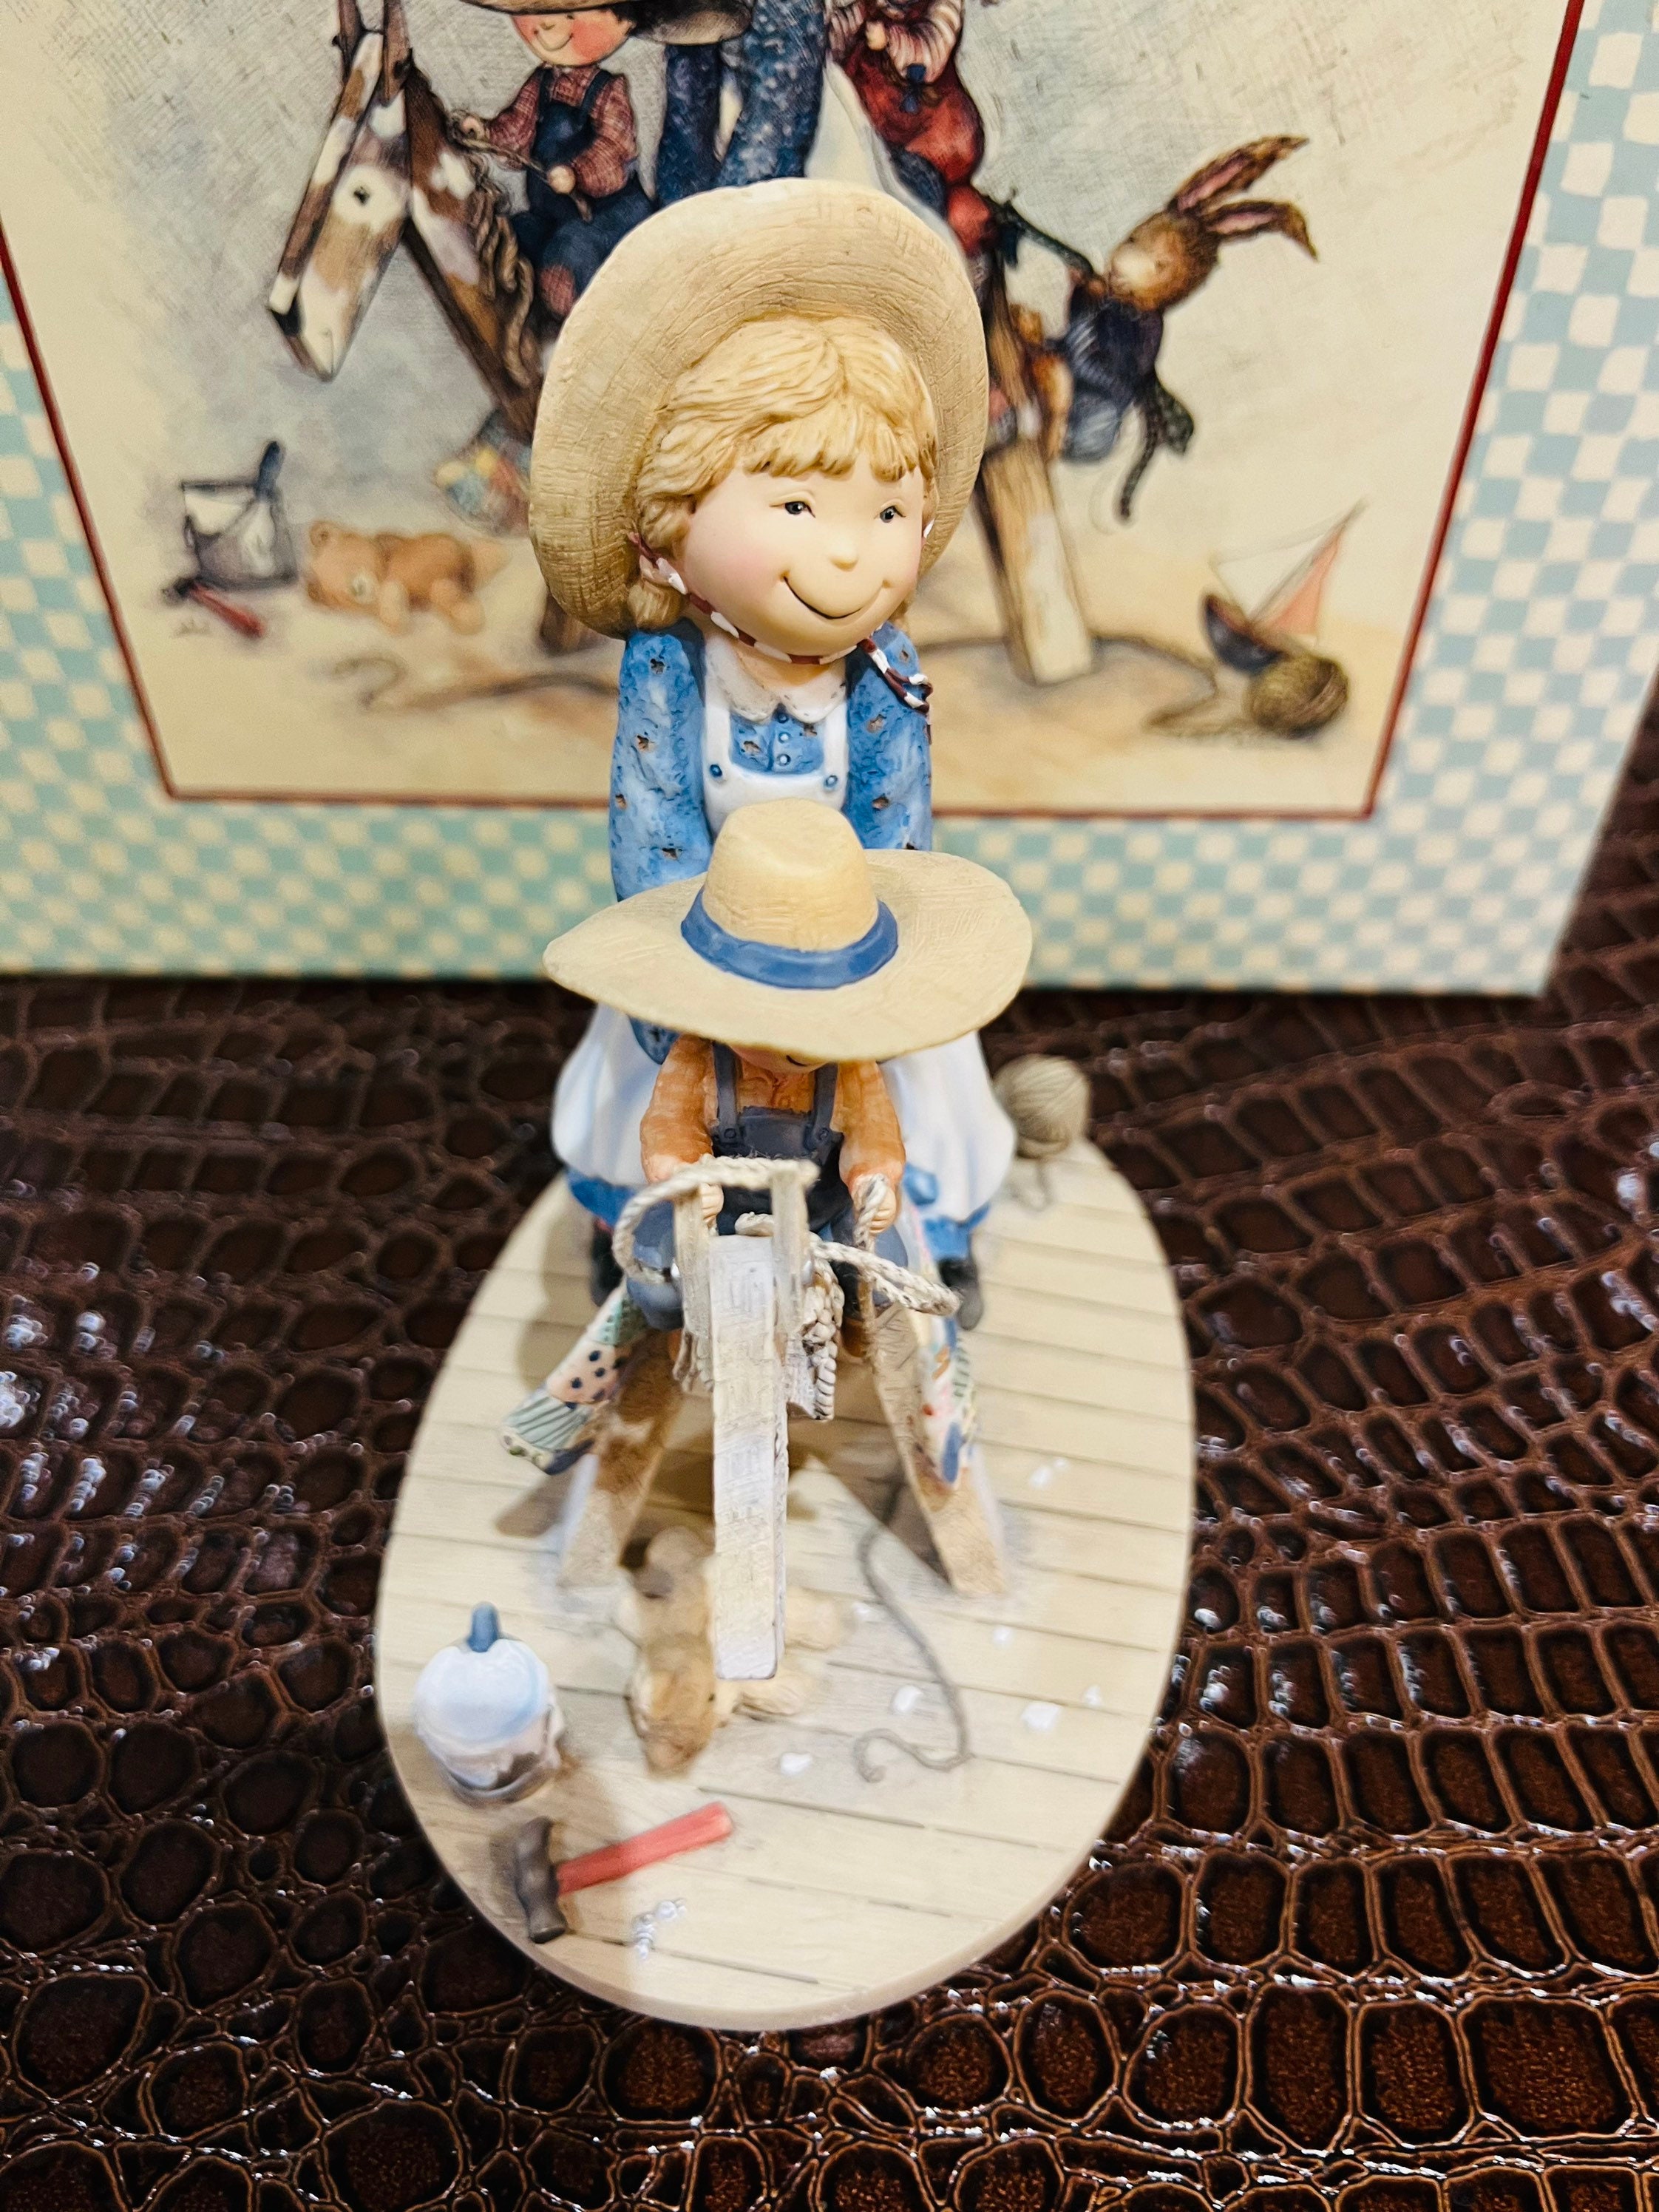 Special Friends Sawhorse Ride First Edition Sherri Buck Baldwin Lang Figurines Kids Playing Mothers Day Gifts Easter Gifts Home Decor Bunny